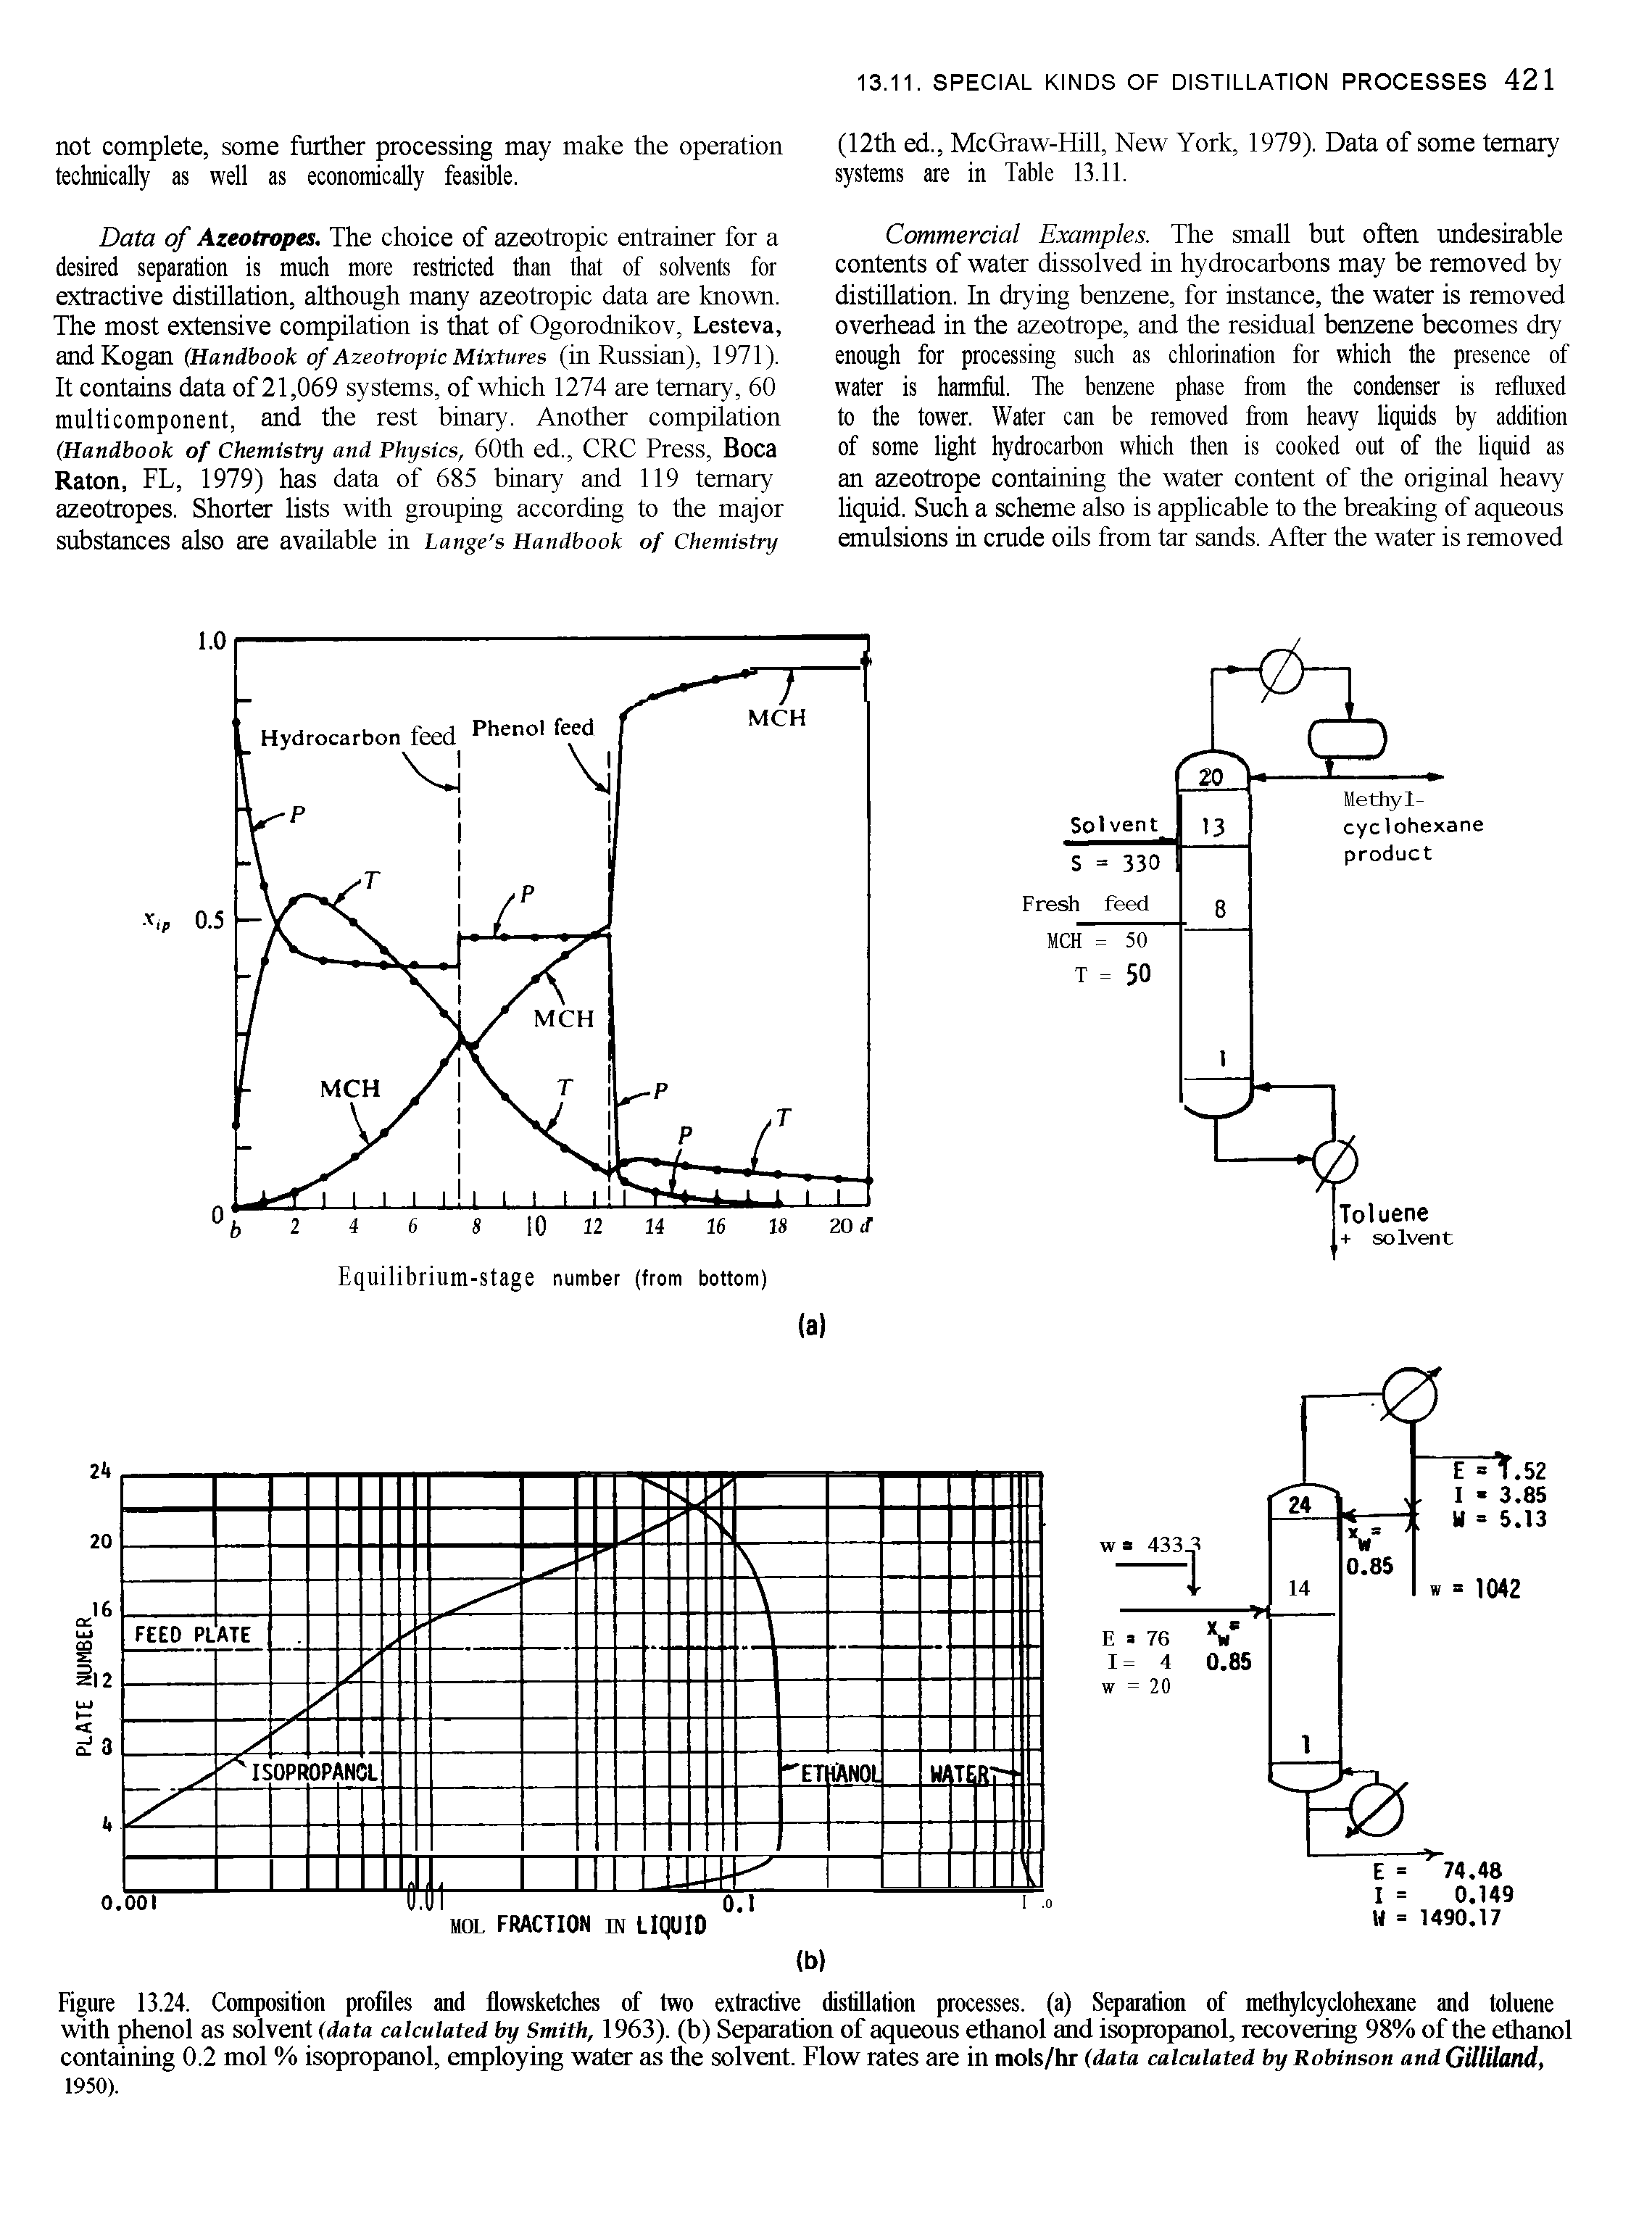 Figure 13.24. Composition profiles and flowsketches of two extractive distillation processes, (a) Separation of methylcyclohexane and toluene with phenol as solvent (data calculated by Smith, 1963). (b) Separation of aqueous ethanol and isopropanol, recovering 98% of the ethanol containing 0.2 mol % isopropanol, employing water as the solvent. Flow rates are in mols/hr (data calculated by Robinson and Gilliland, 1950).